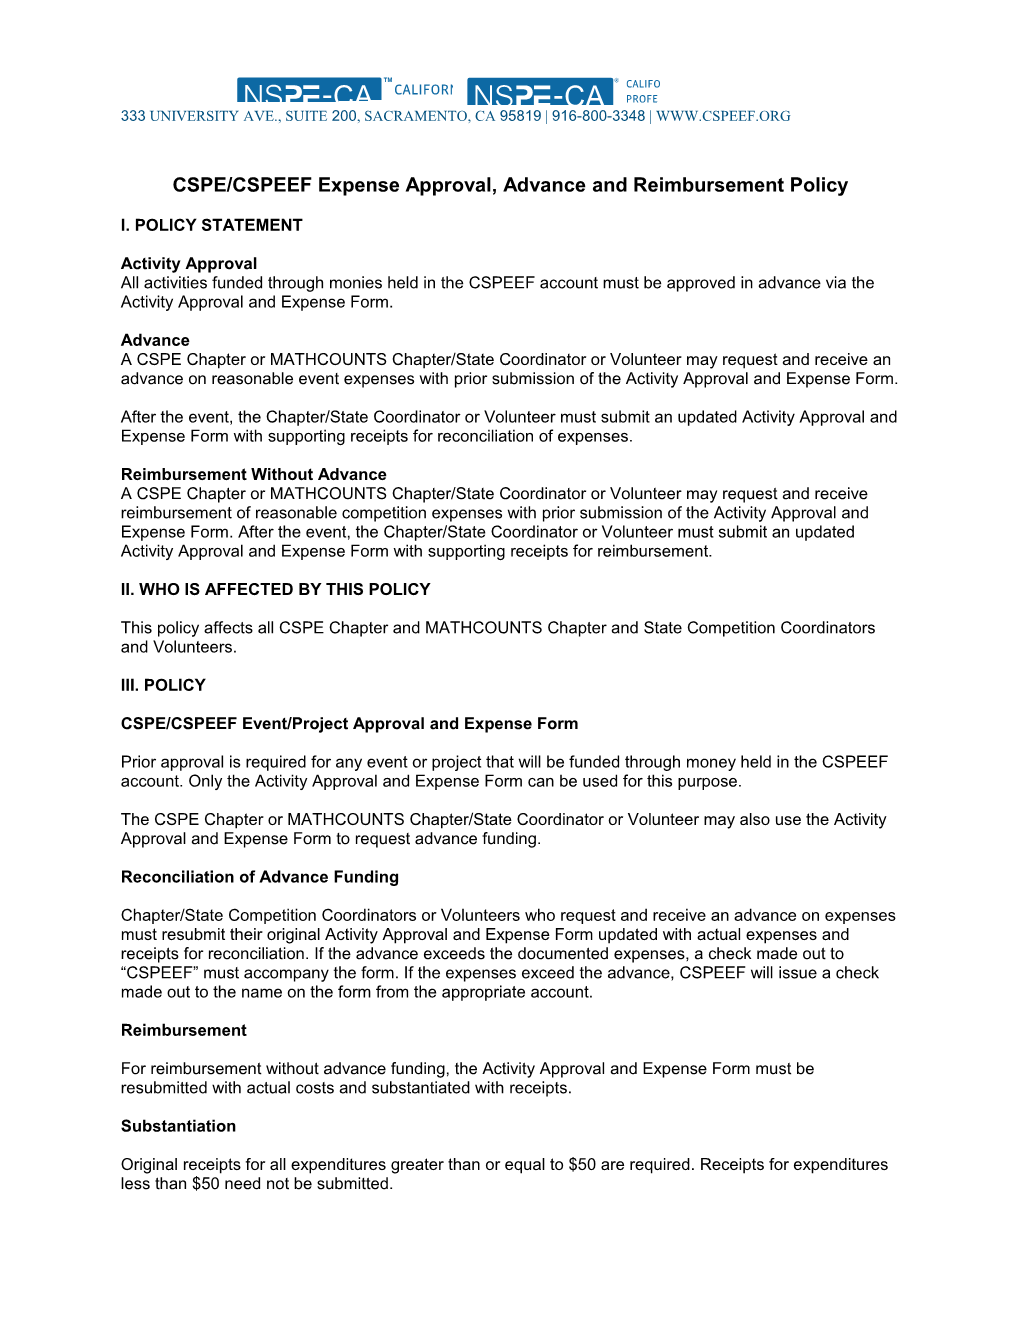 CSPE/CSPEEF Expense Approval, Advance and Reimbursement Policy